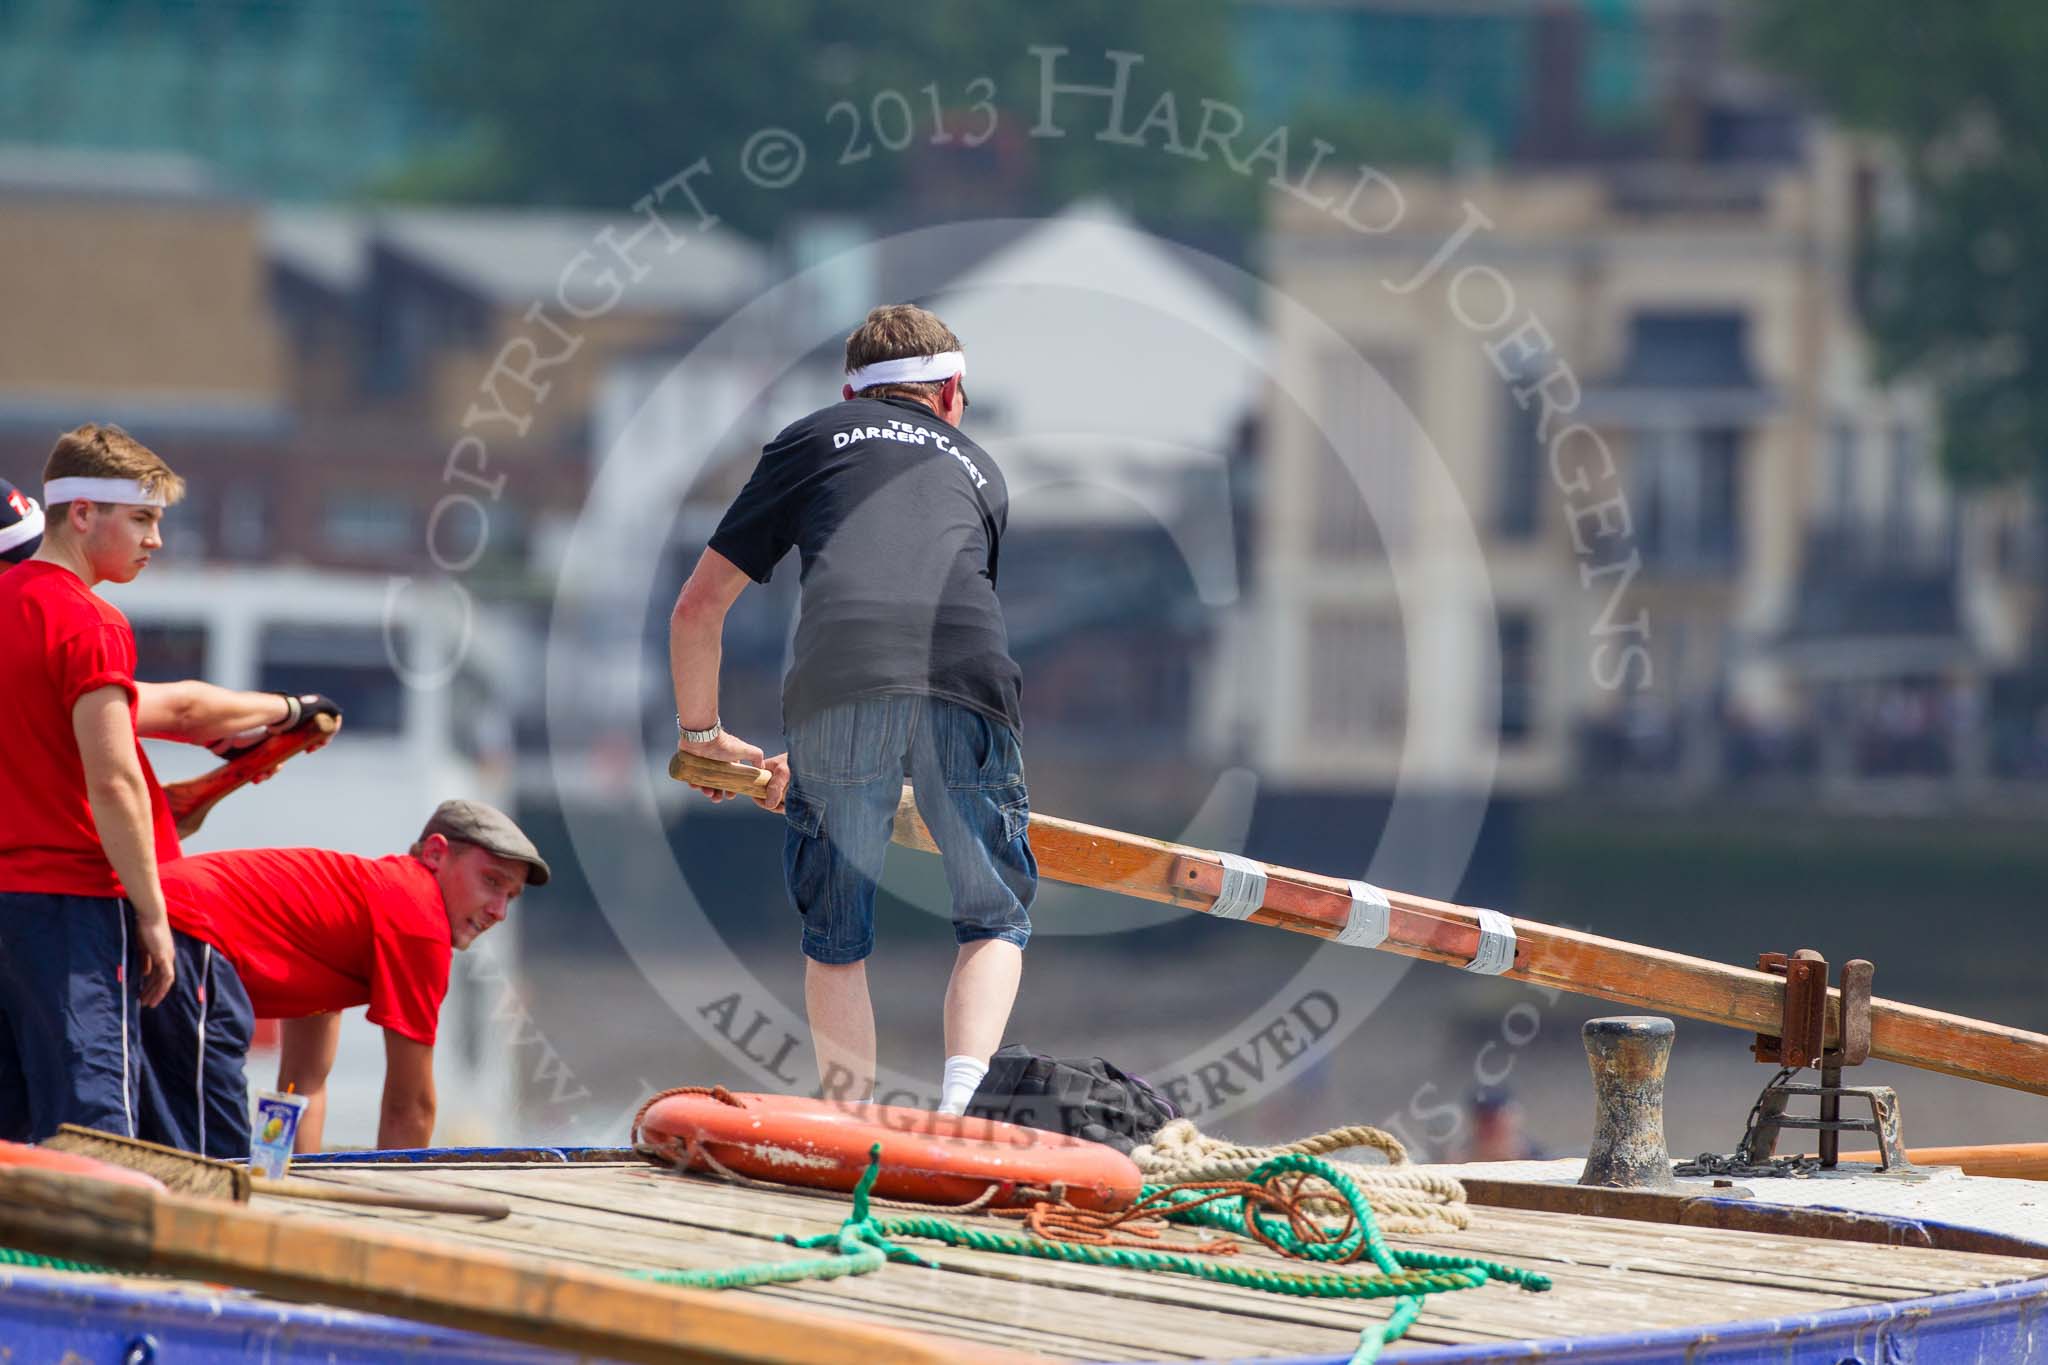 TOW River Thames Barge Driving Race 2013: Rowers on the deck of barge "Spirit of Mountabatten", by Mechanical Movements and Enabling Services Ltd, seen looking over the deck of barge "Darren Lacey", by Princess Pocahontas, during the race..
River Thames between Greenwich and Westminster,
London,

United Kingdom,
on 13 July 2013 at 12:38, image #143